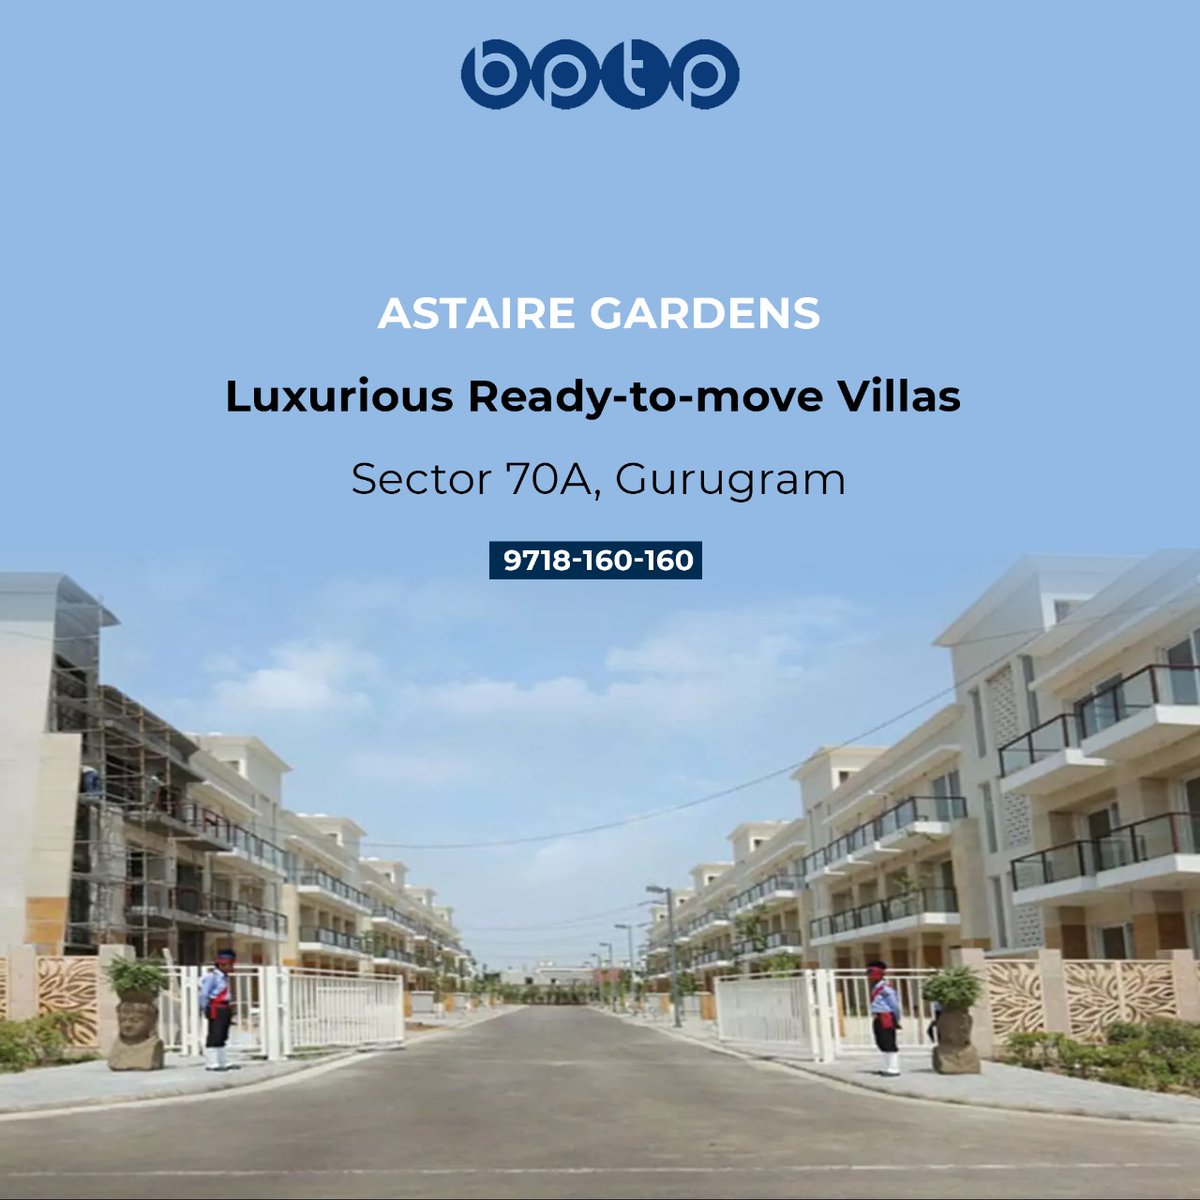 #BPTP #AstaireGardens Sector 70A #Gurgaon

#Luxurious Ready-to-move #Villas

Call 9718160160 #AssetsGalleria

#BPTPAstaireGarden #LuxuryLiving #GurugramRealEstate #Opulence #FirstLook #Sector70A #DreamHomes #InvestmentOpportunity